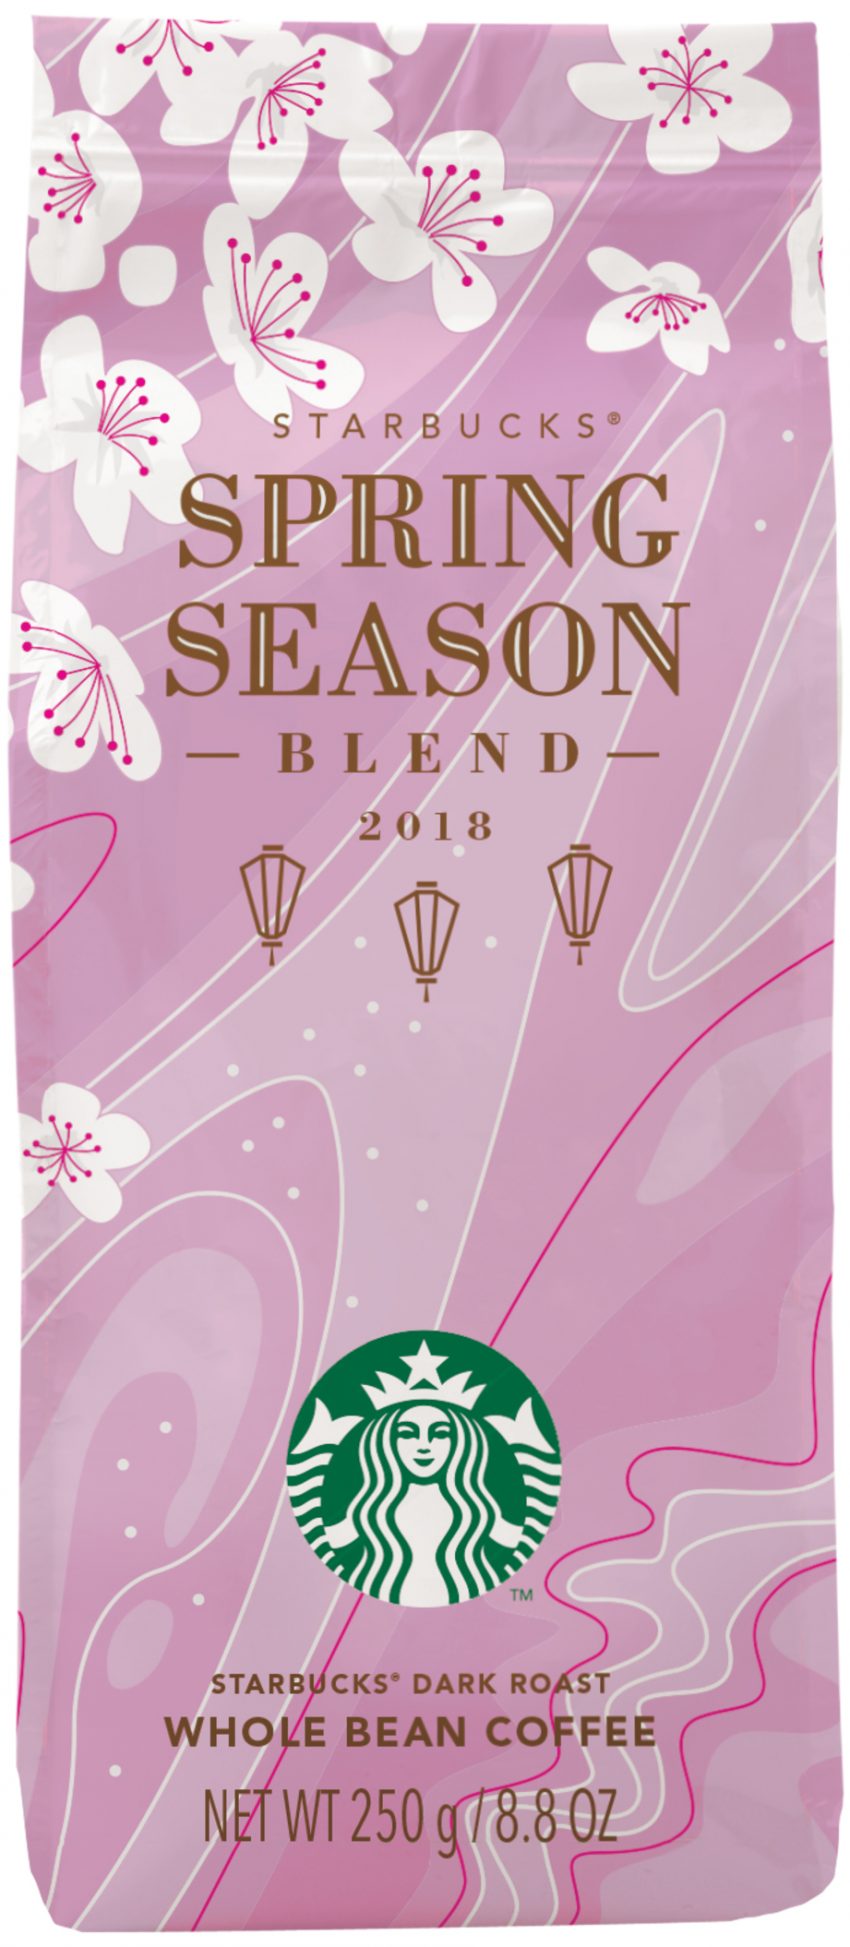 Get Your Fix of Starbucks With Their New Spring Drinks